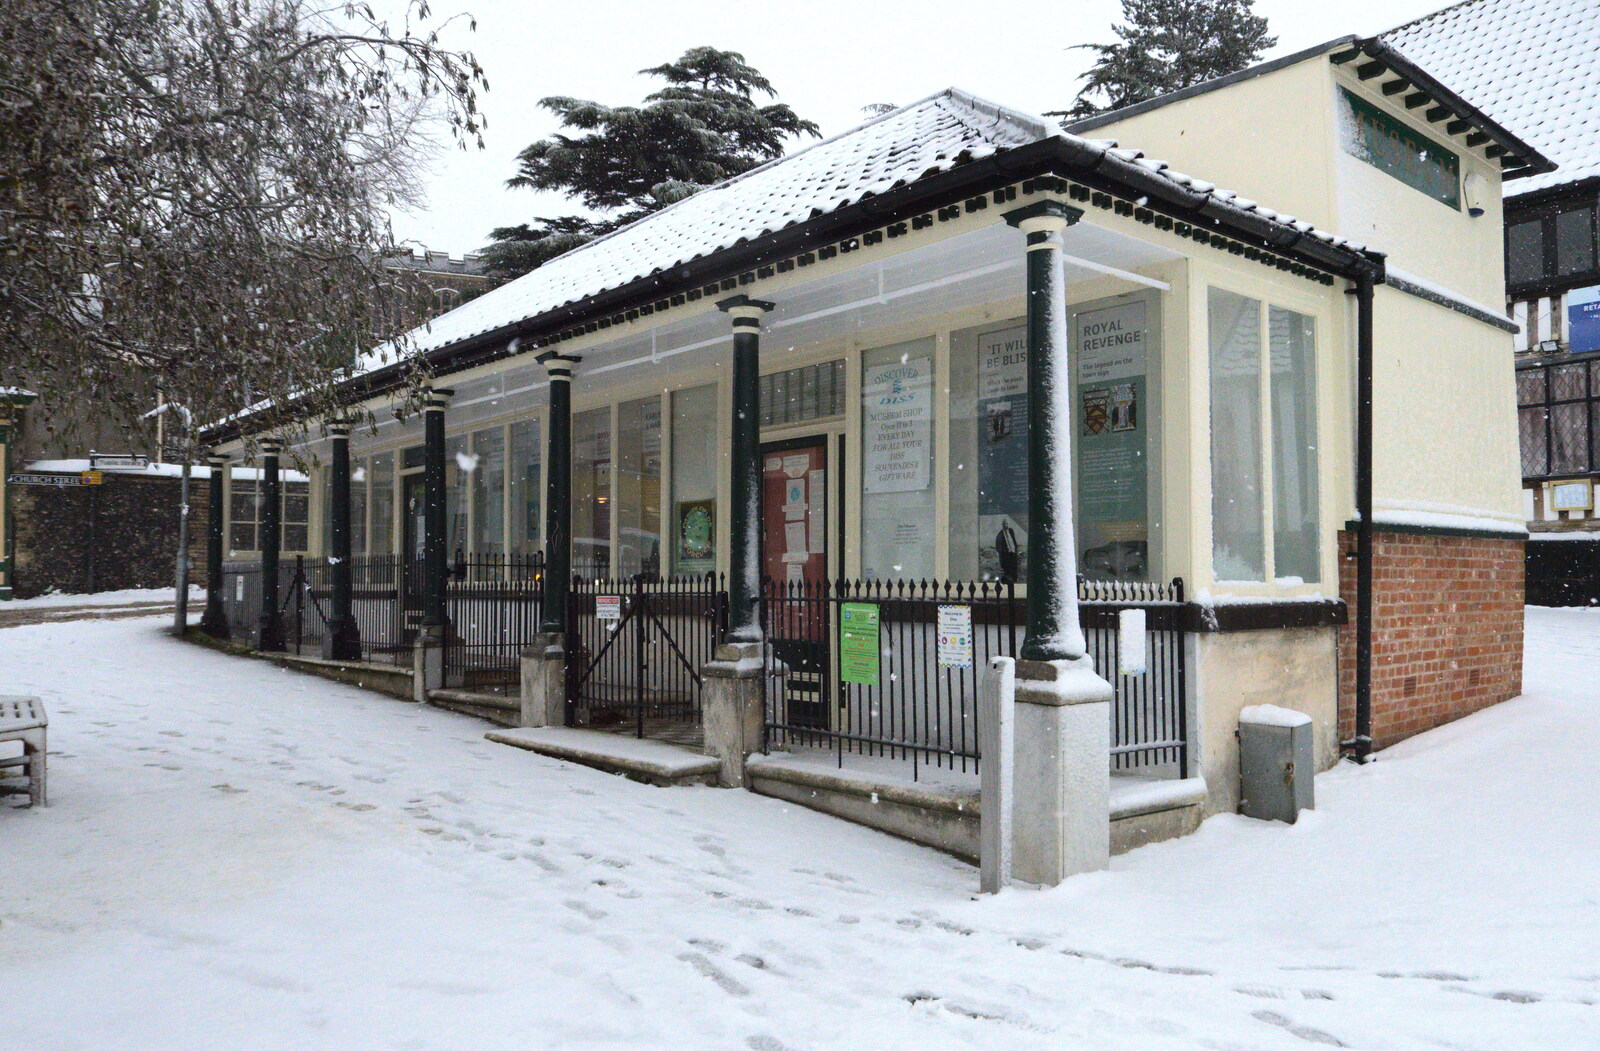 Diss Museum, in the old Shambles from A Snowy Morning, Diss, Norfolk - 16th January 2021